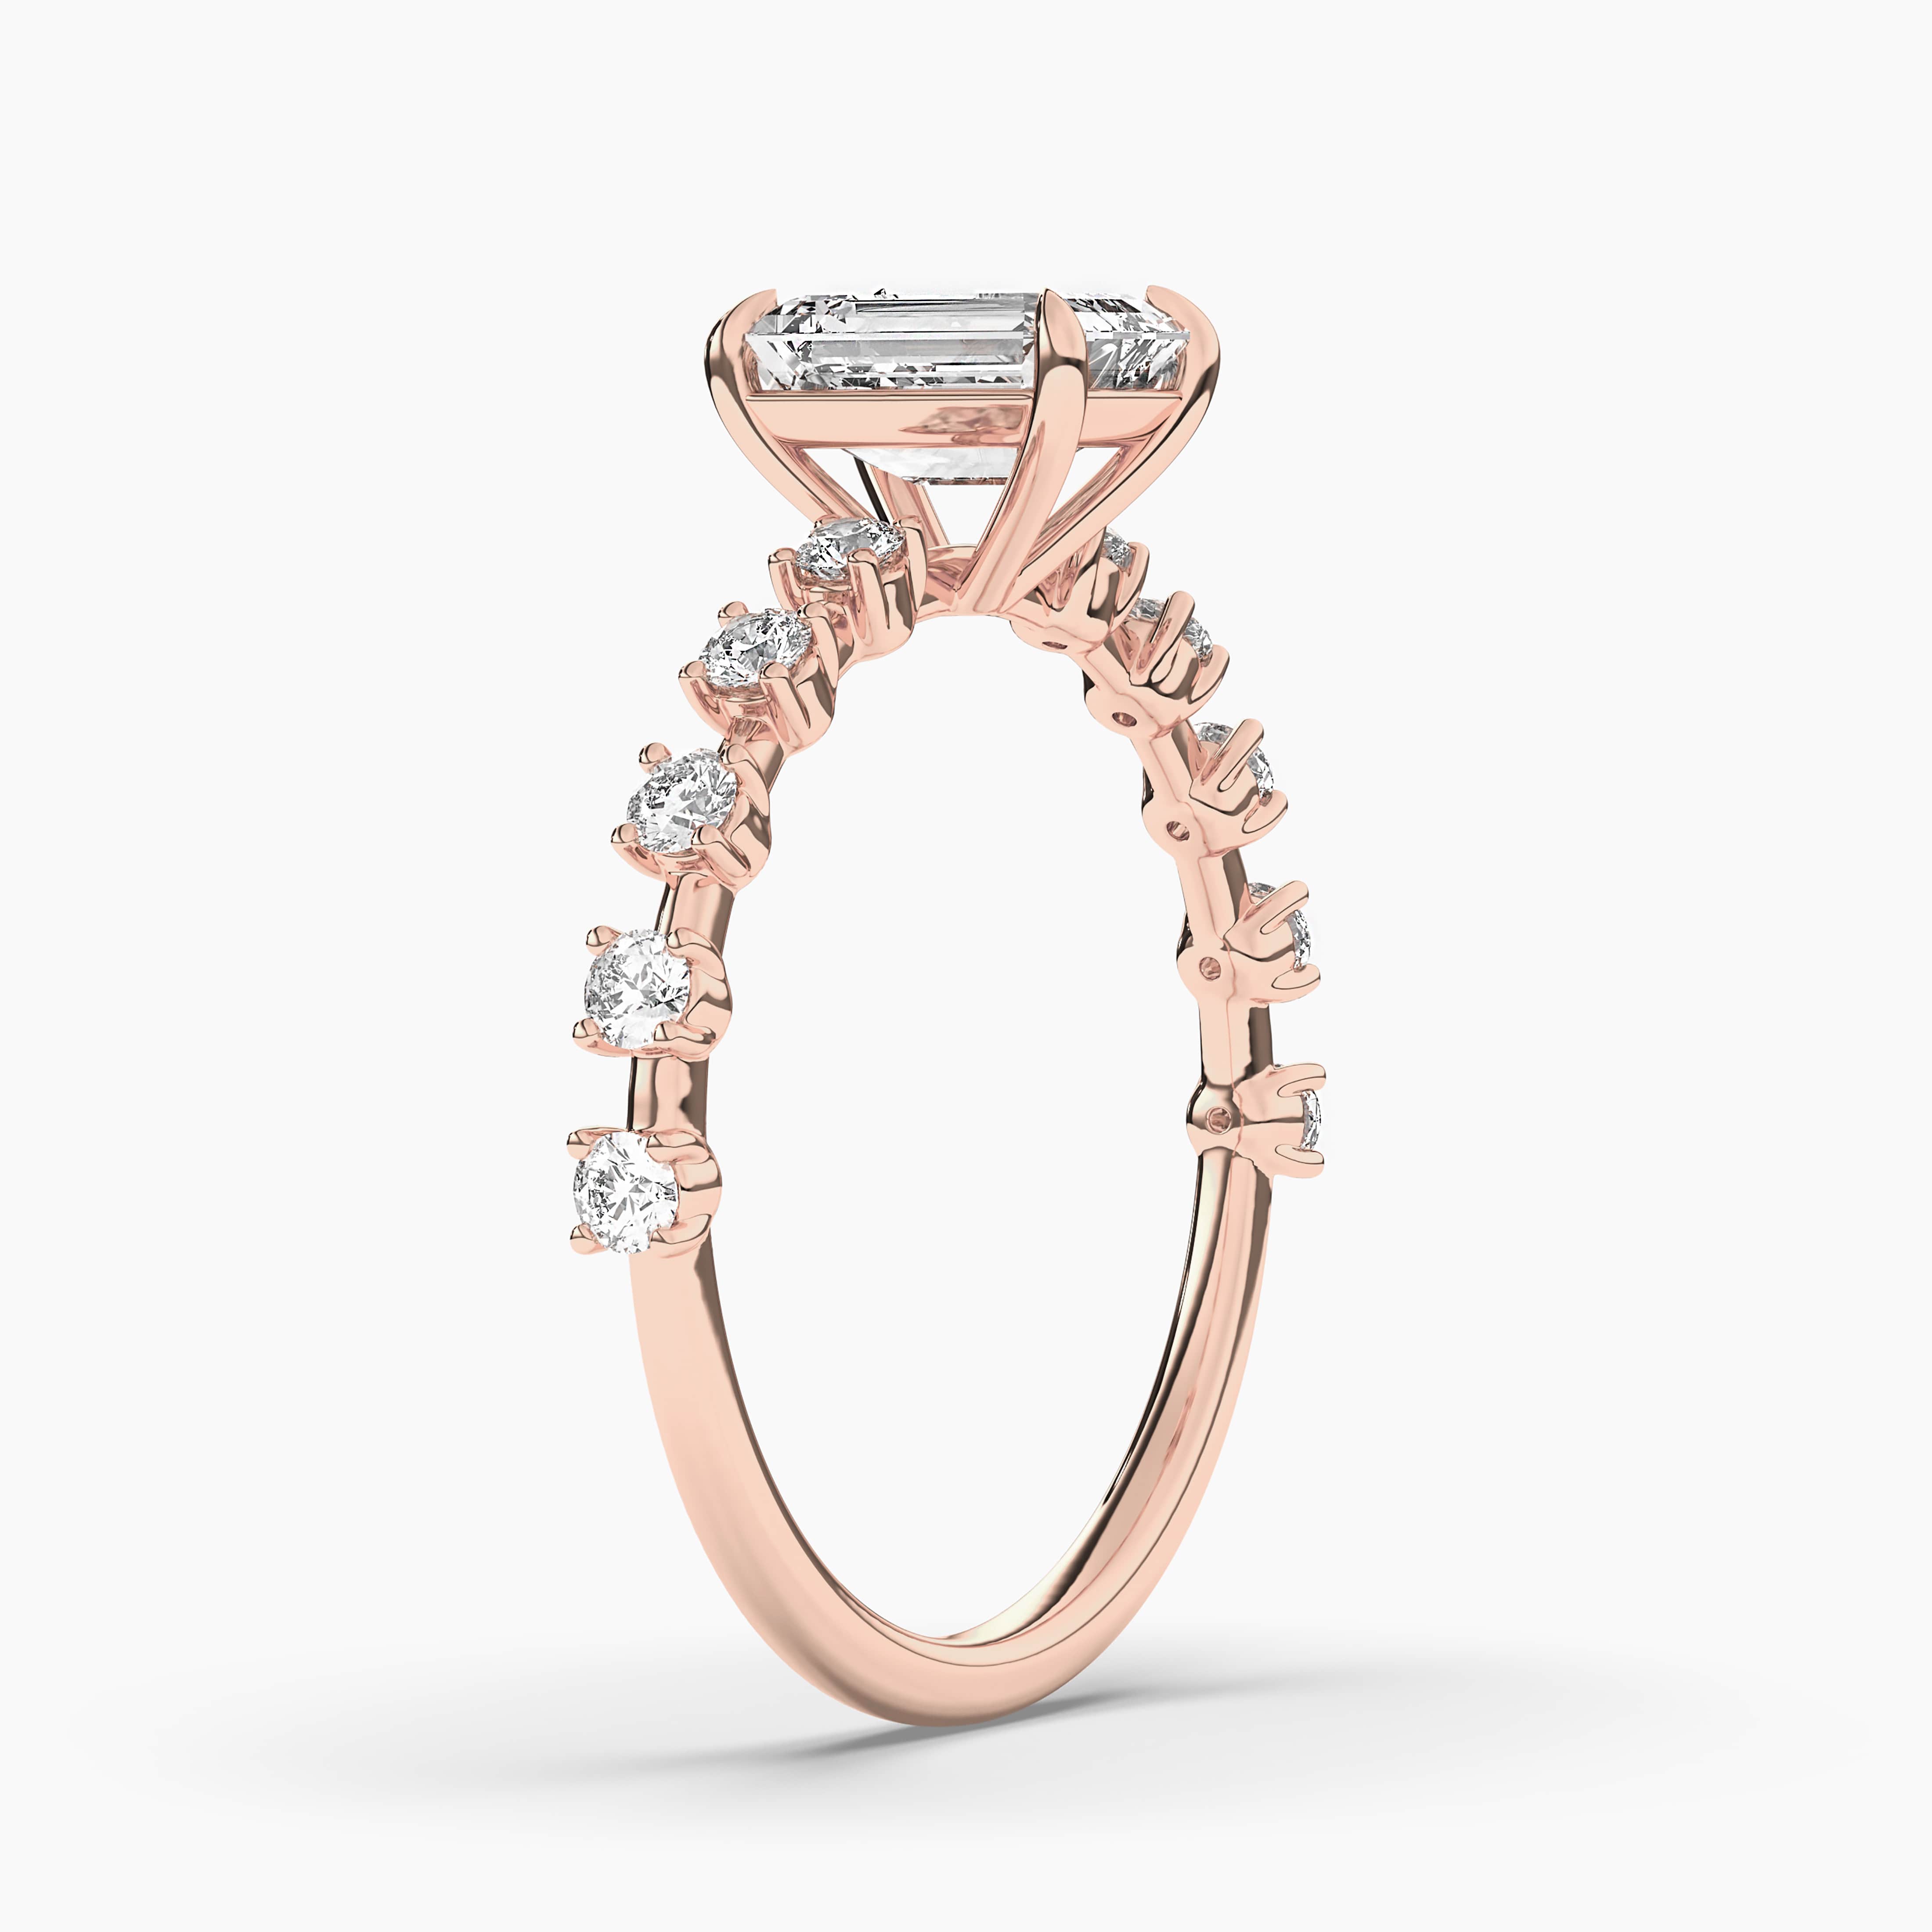 Rose Gold Emerald Cut Solitaire Engagement Ring with Pave Diamonds